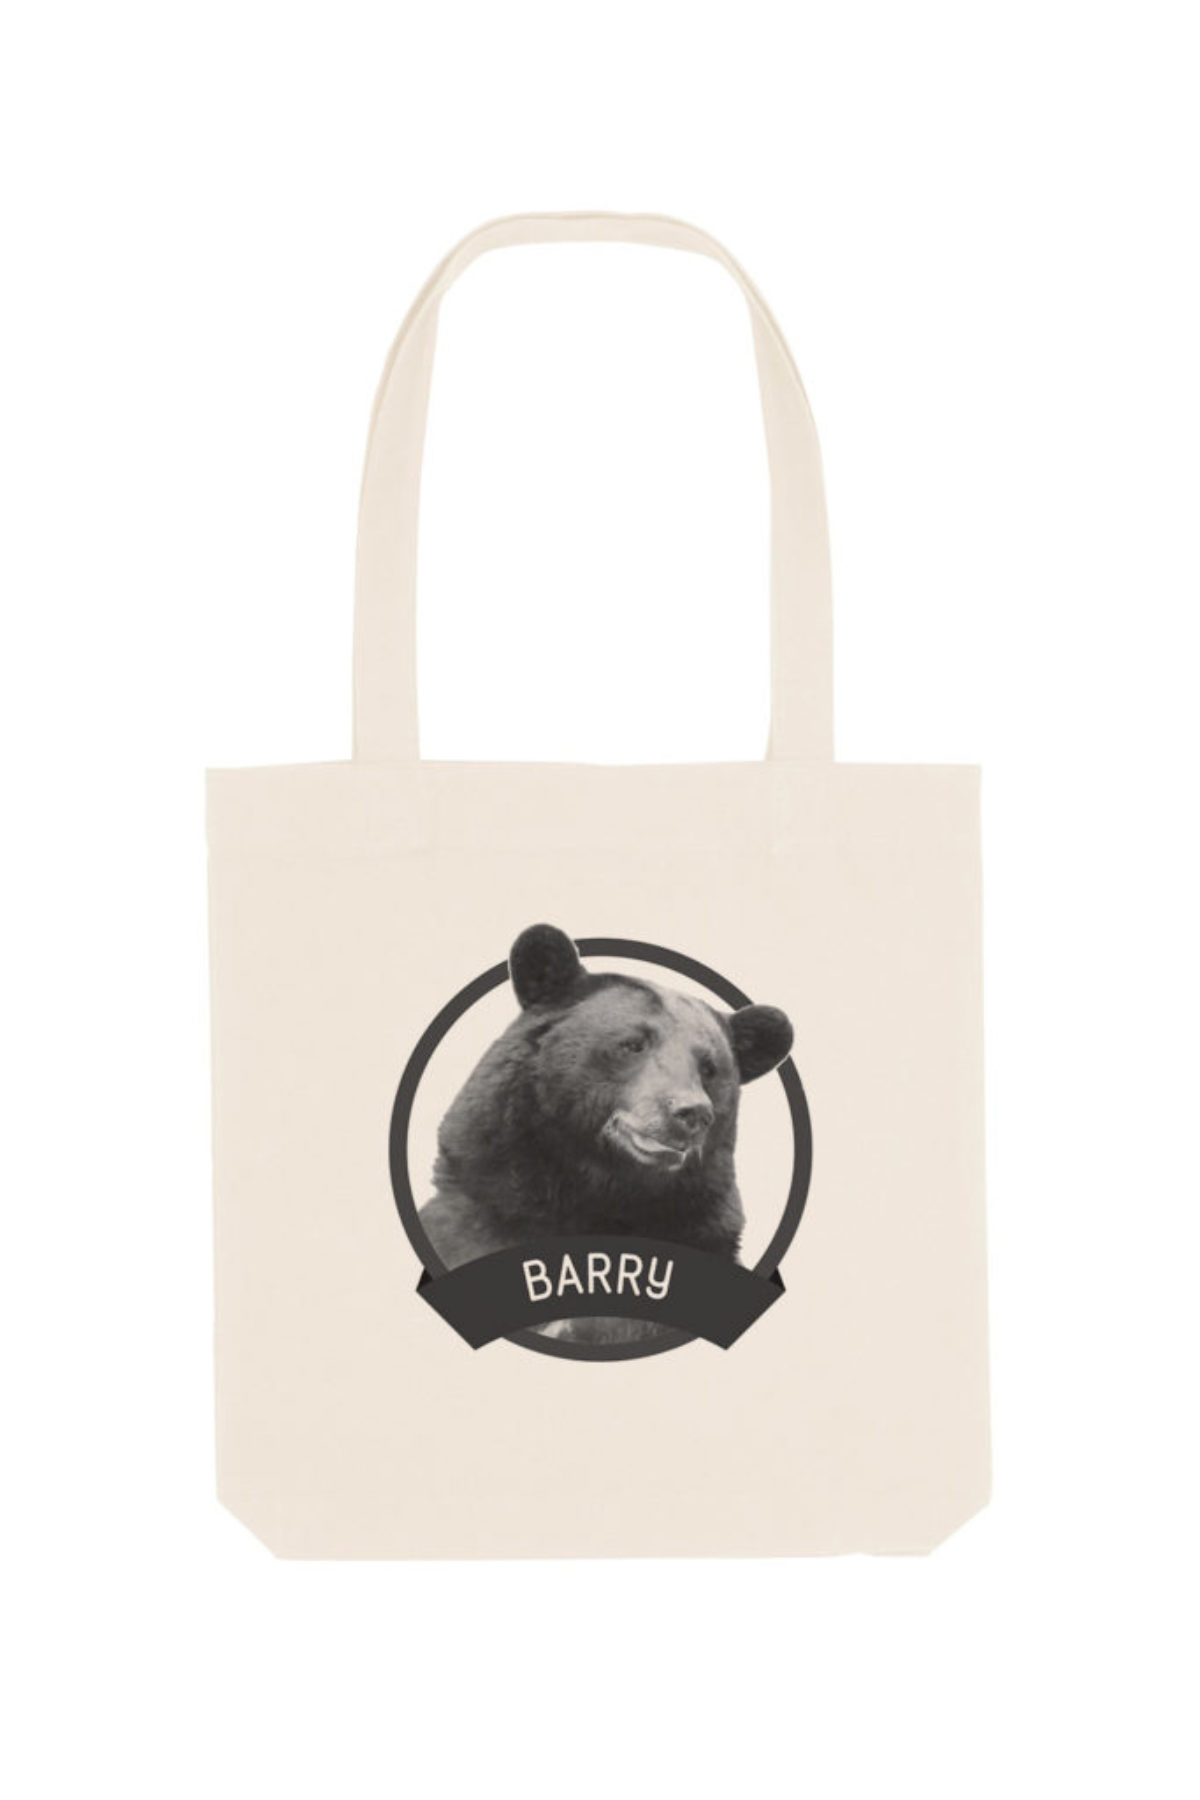 Tote-bag Barry